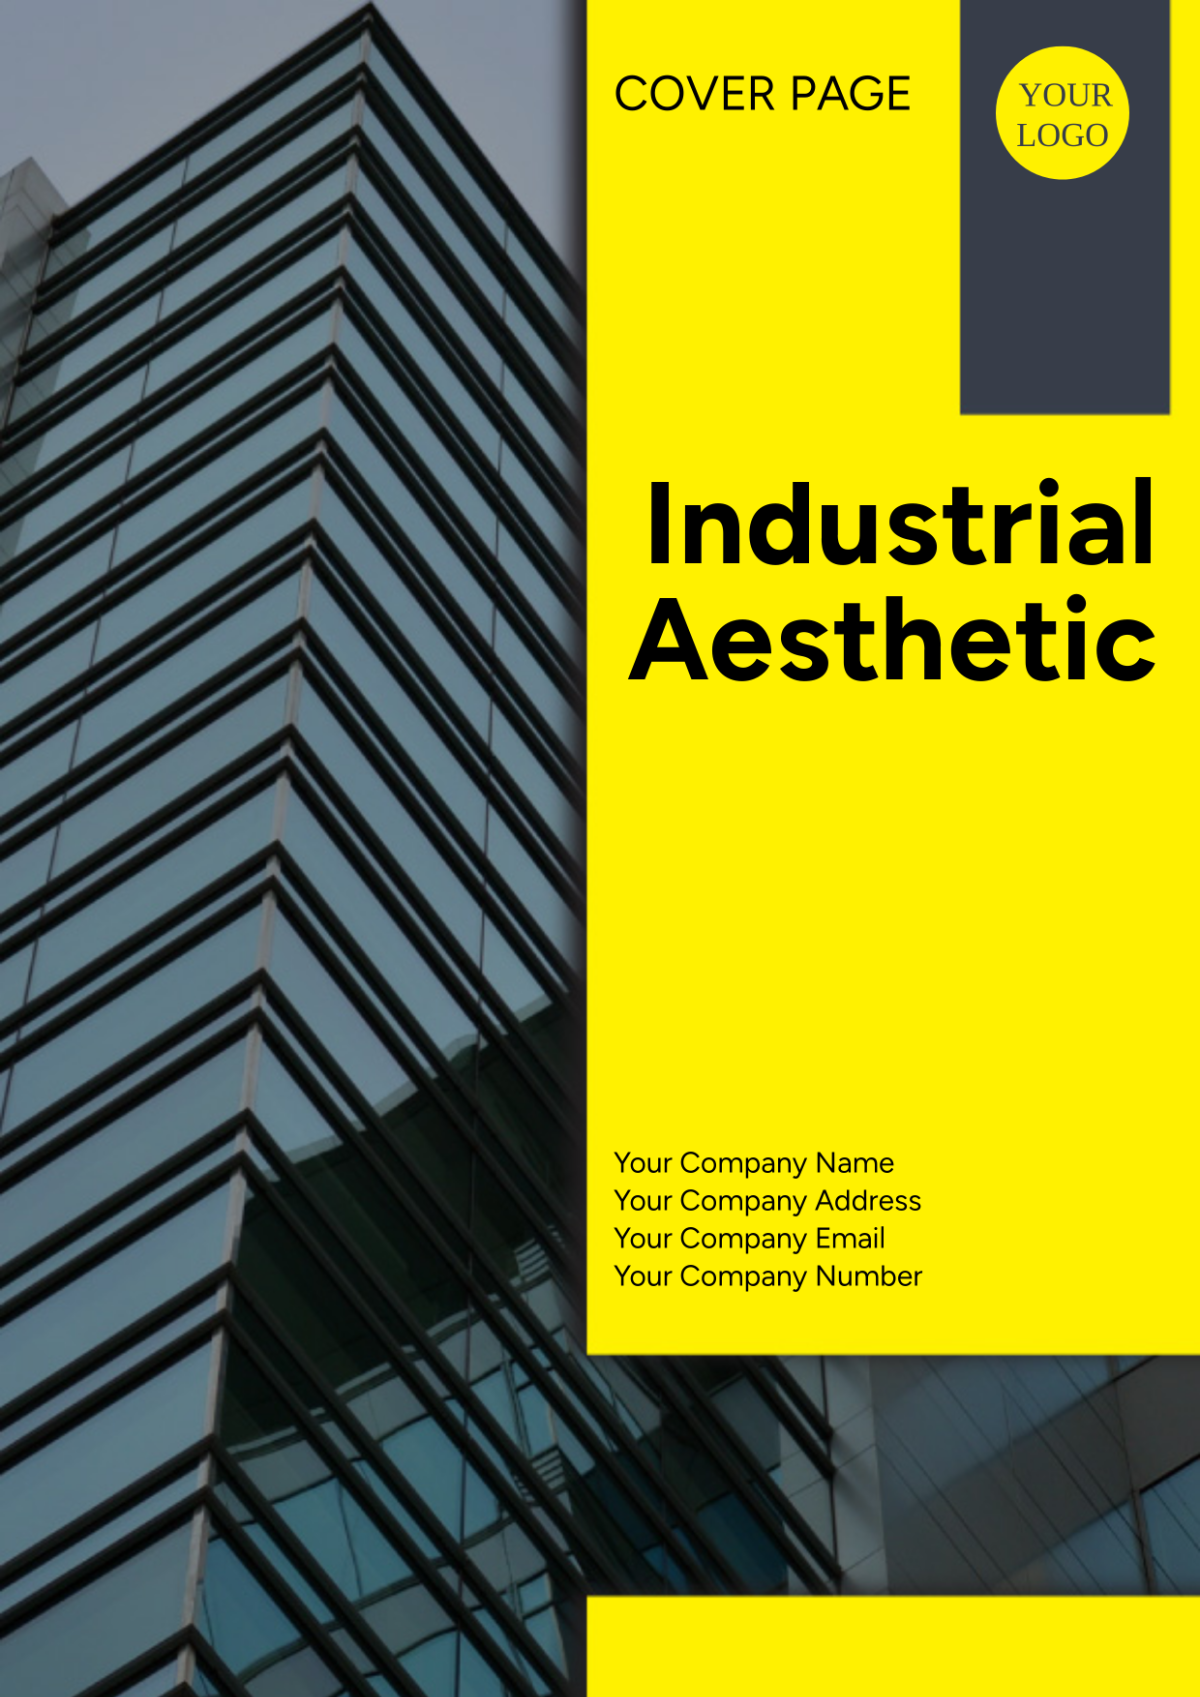 Industrial Aesthetic Cover Page